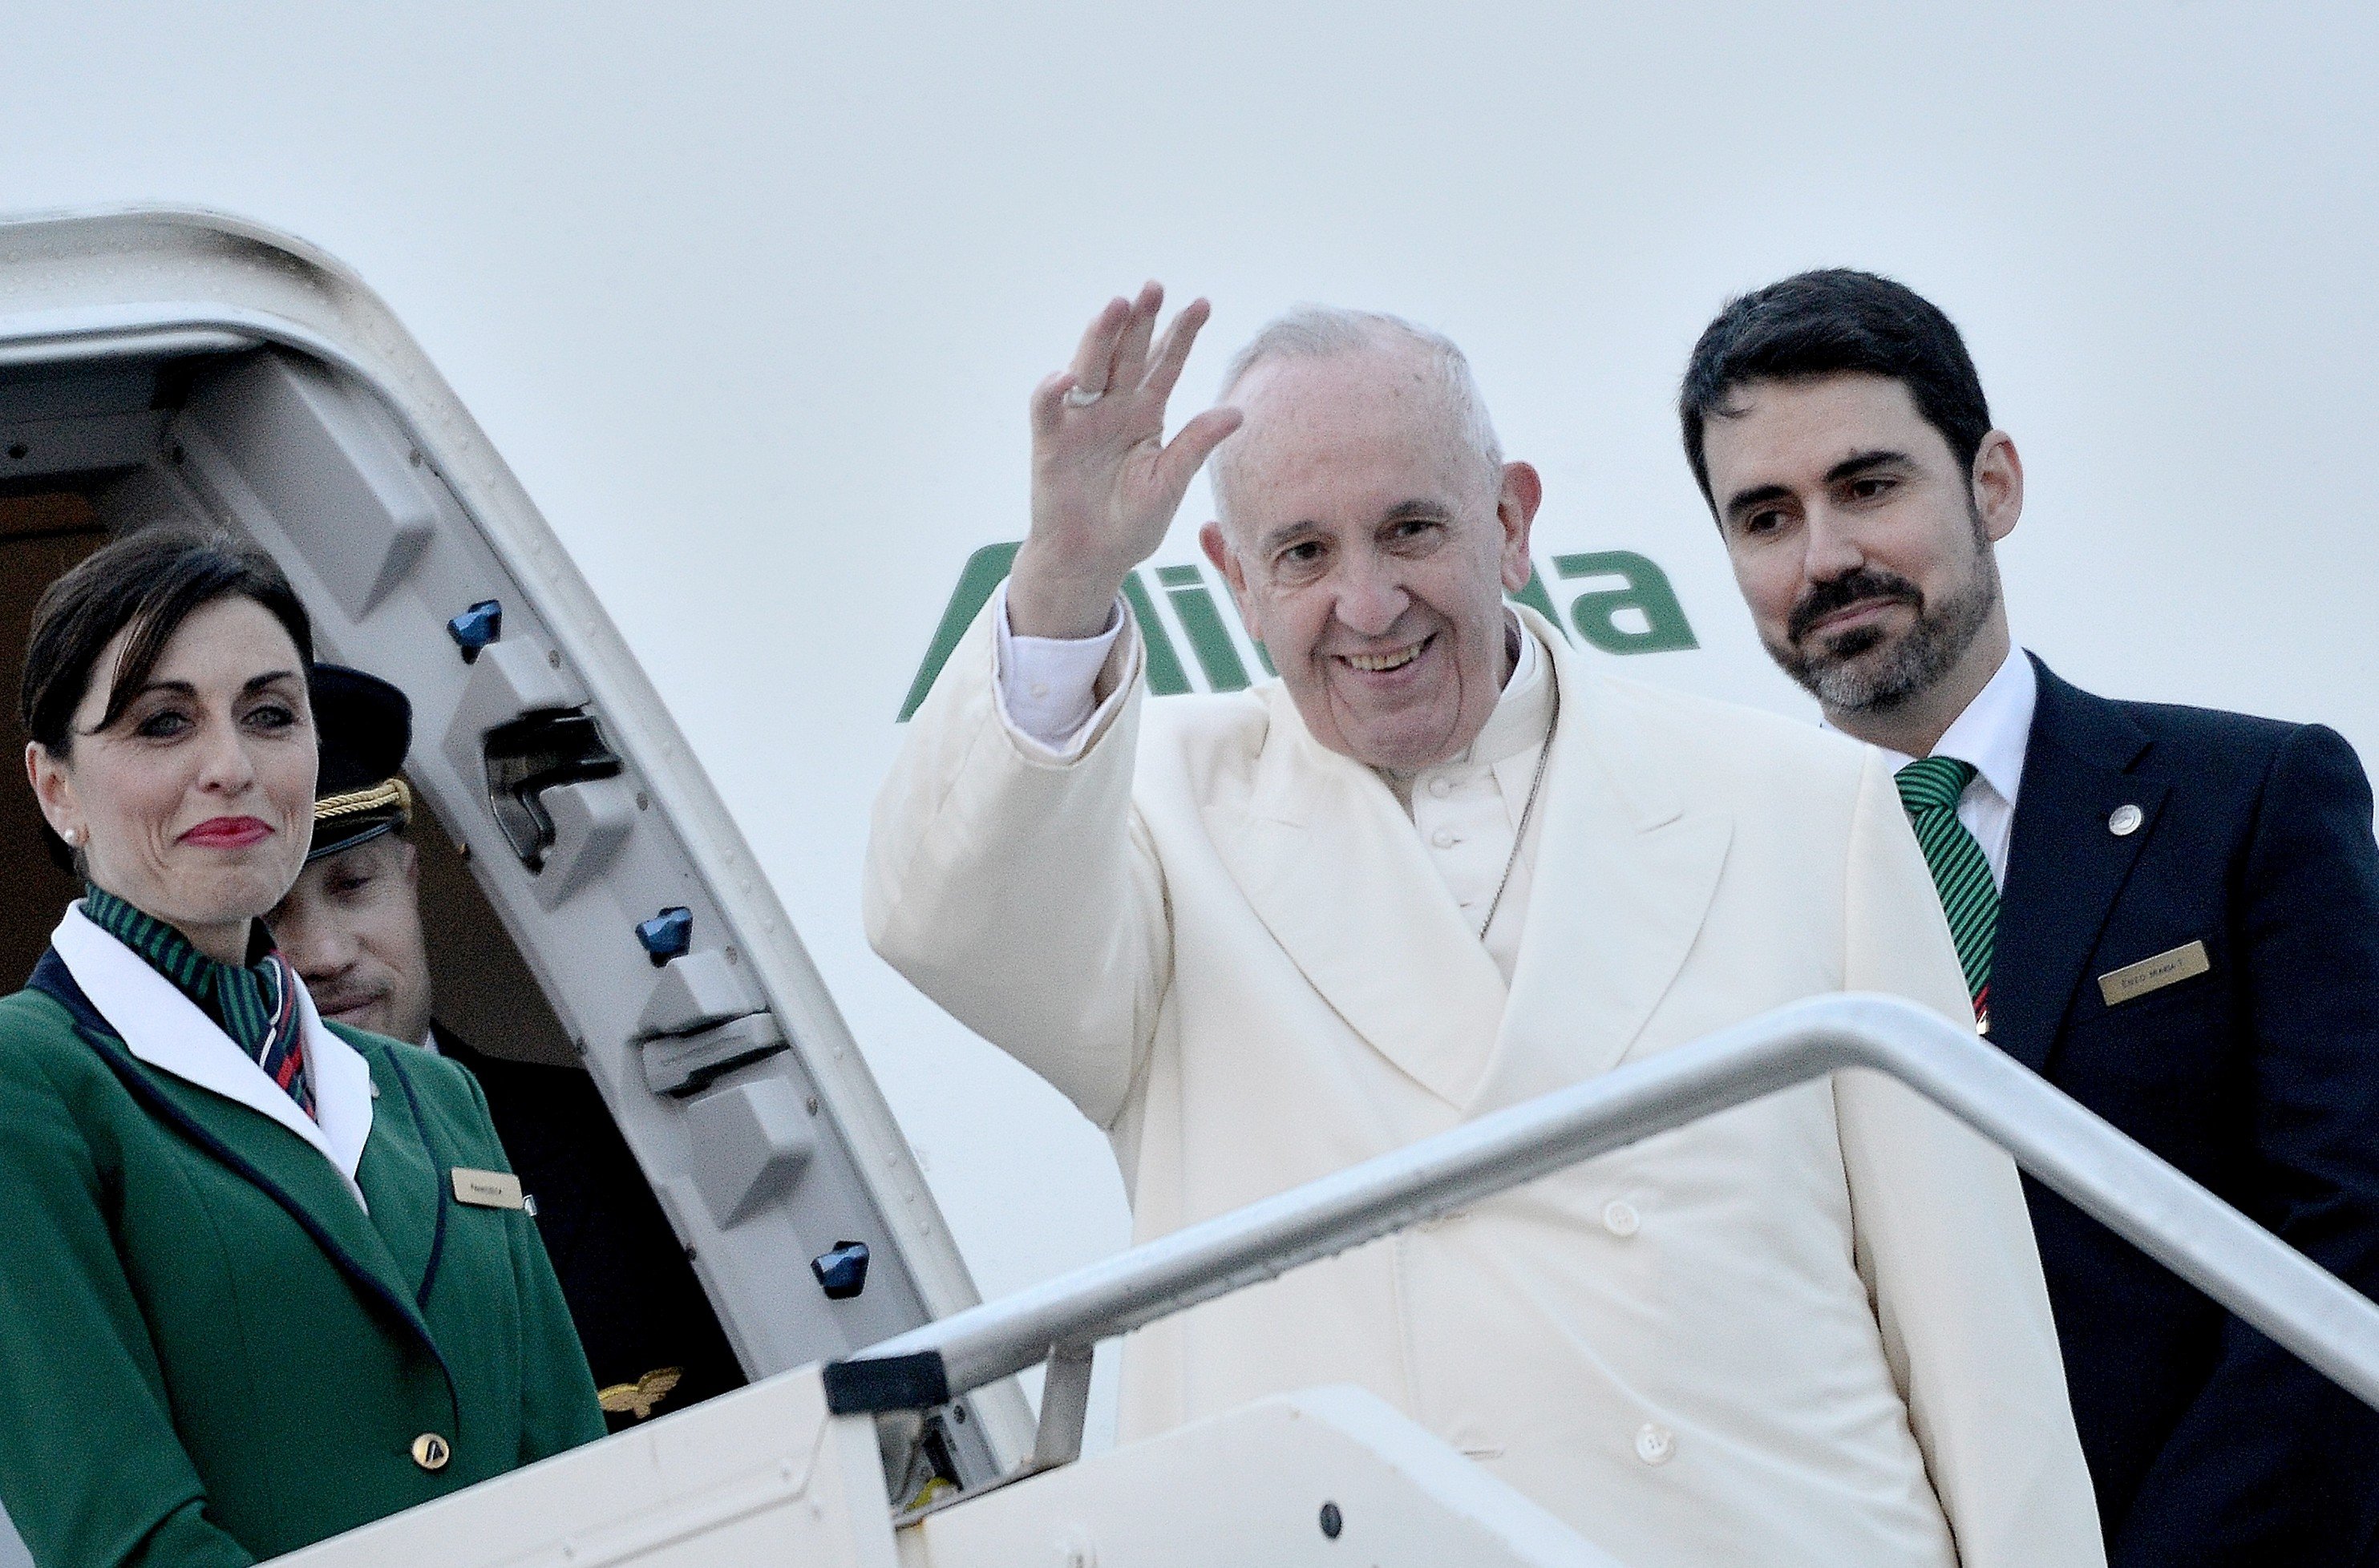 Pope  Francis at Rome's Fiumicino airport on his way to Mexico for a week-long trip, on Feb. 12, 2016. He is scheduled to stop in Cuba for an historical meeting with Russian Orthodox Patriarch Kirill. (Andrea Franceschini—Pacific Press/Corbis)